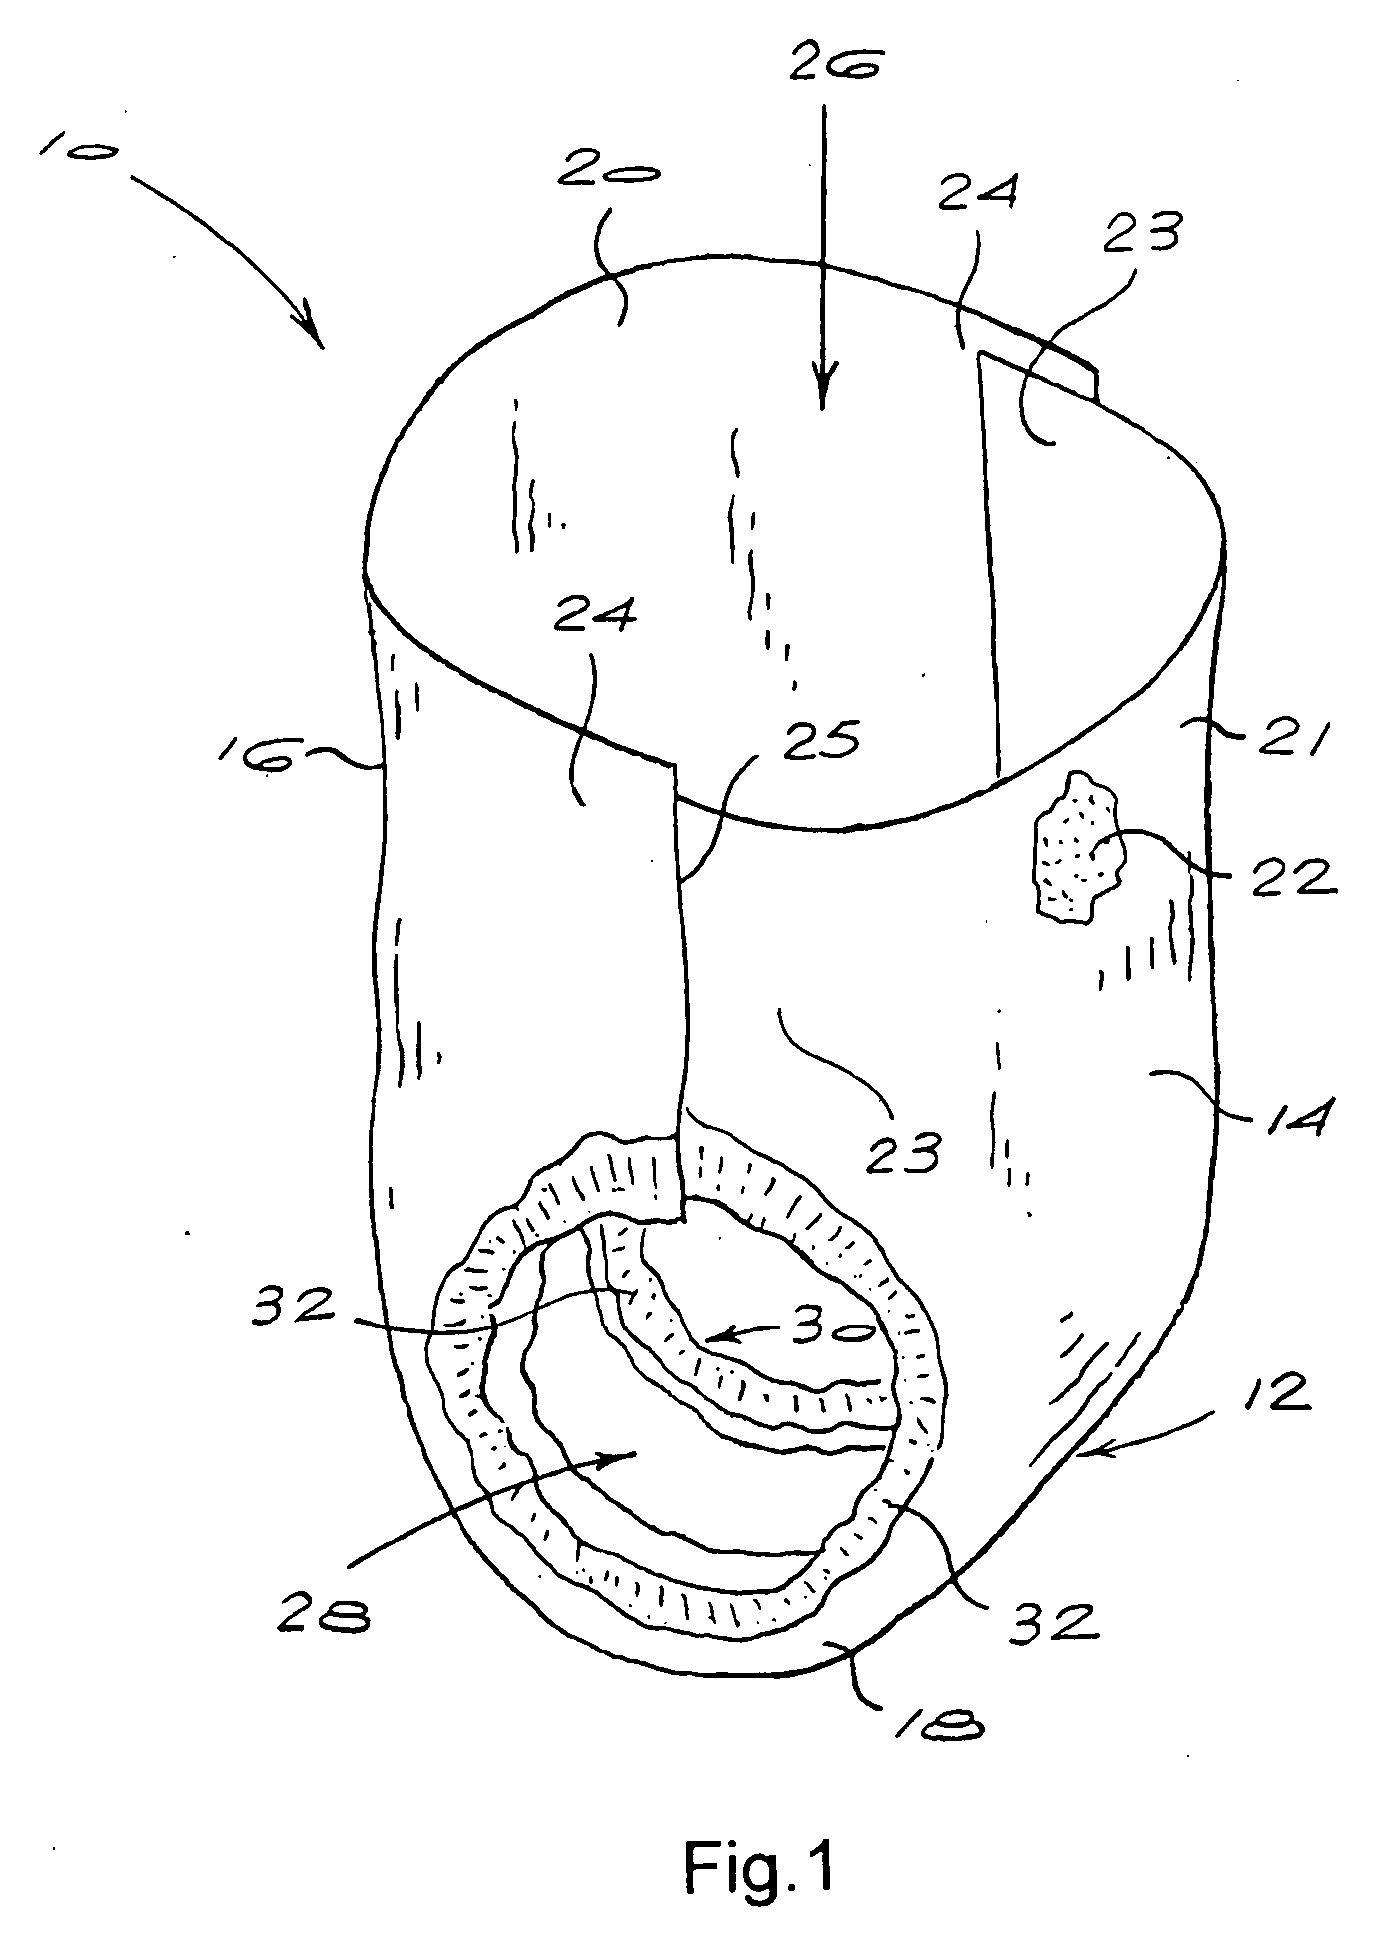 Method for bonding surfaces on a web